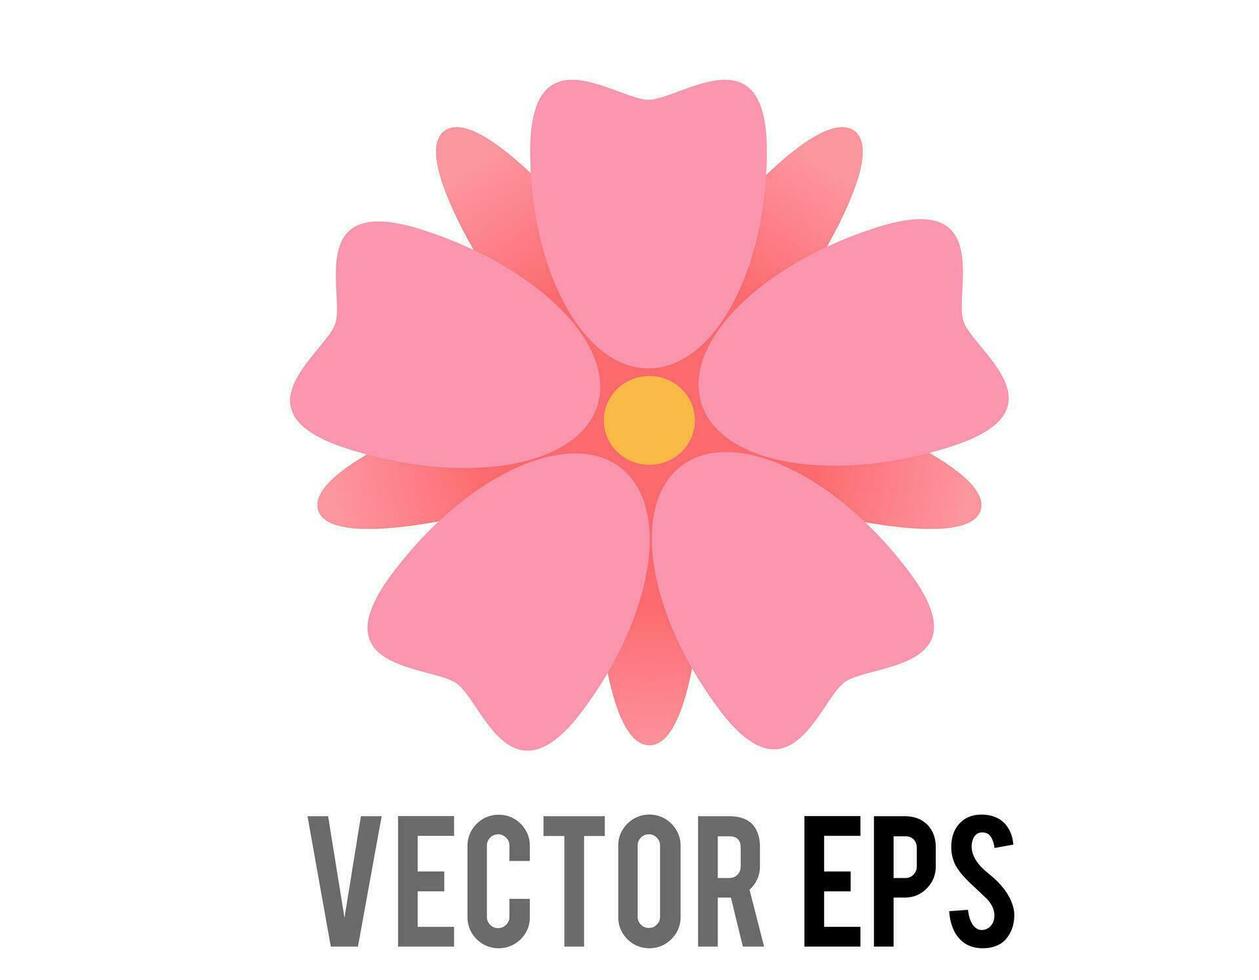 Vector light pink sakura flower of cherry blossom icon with five petals